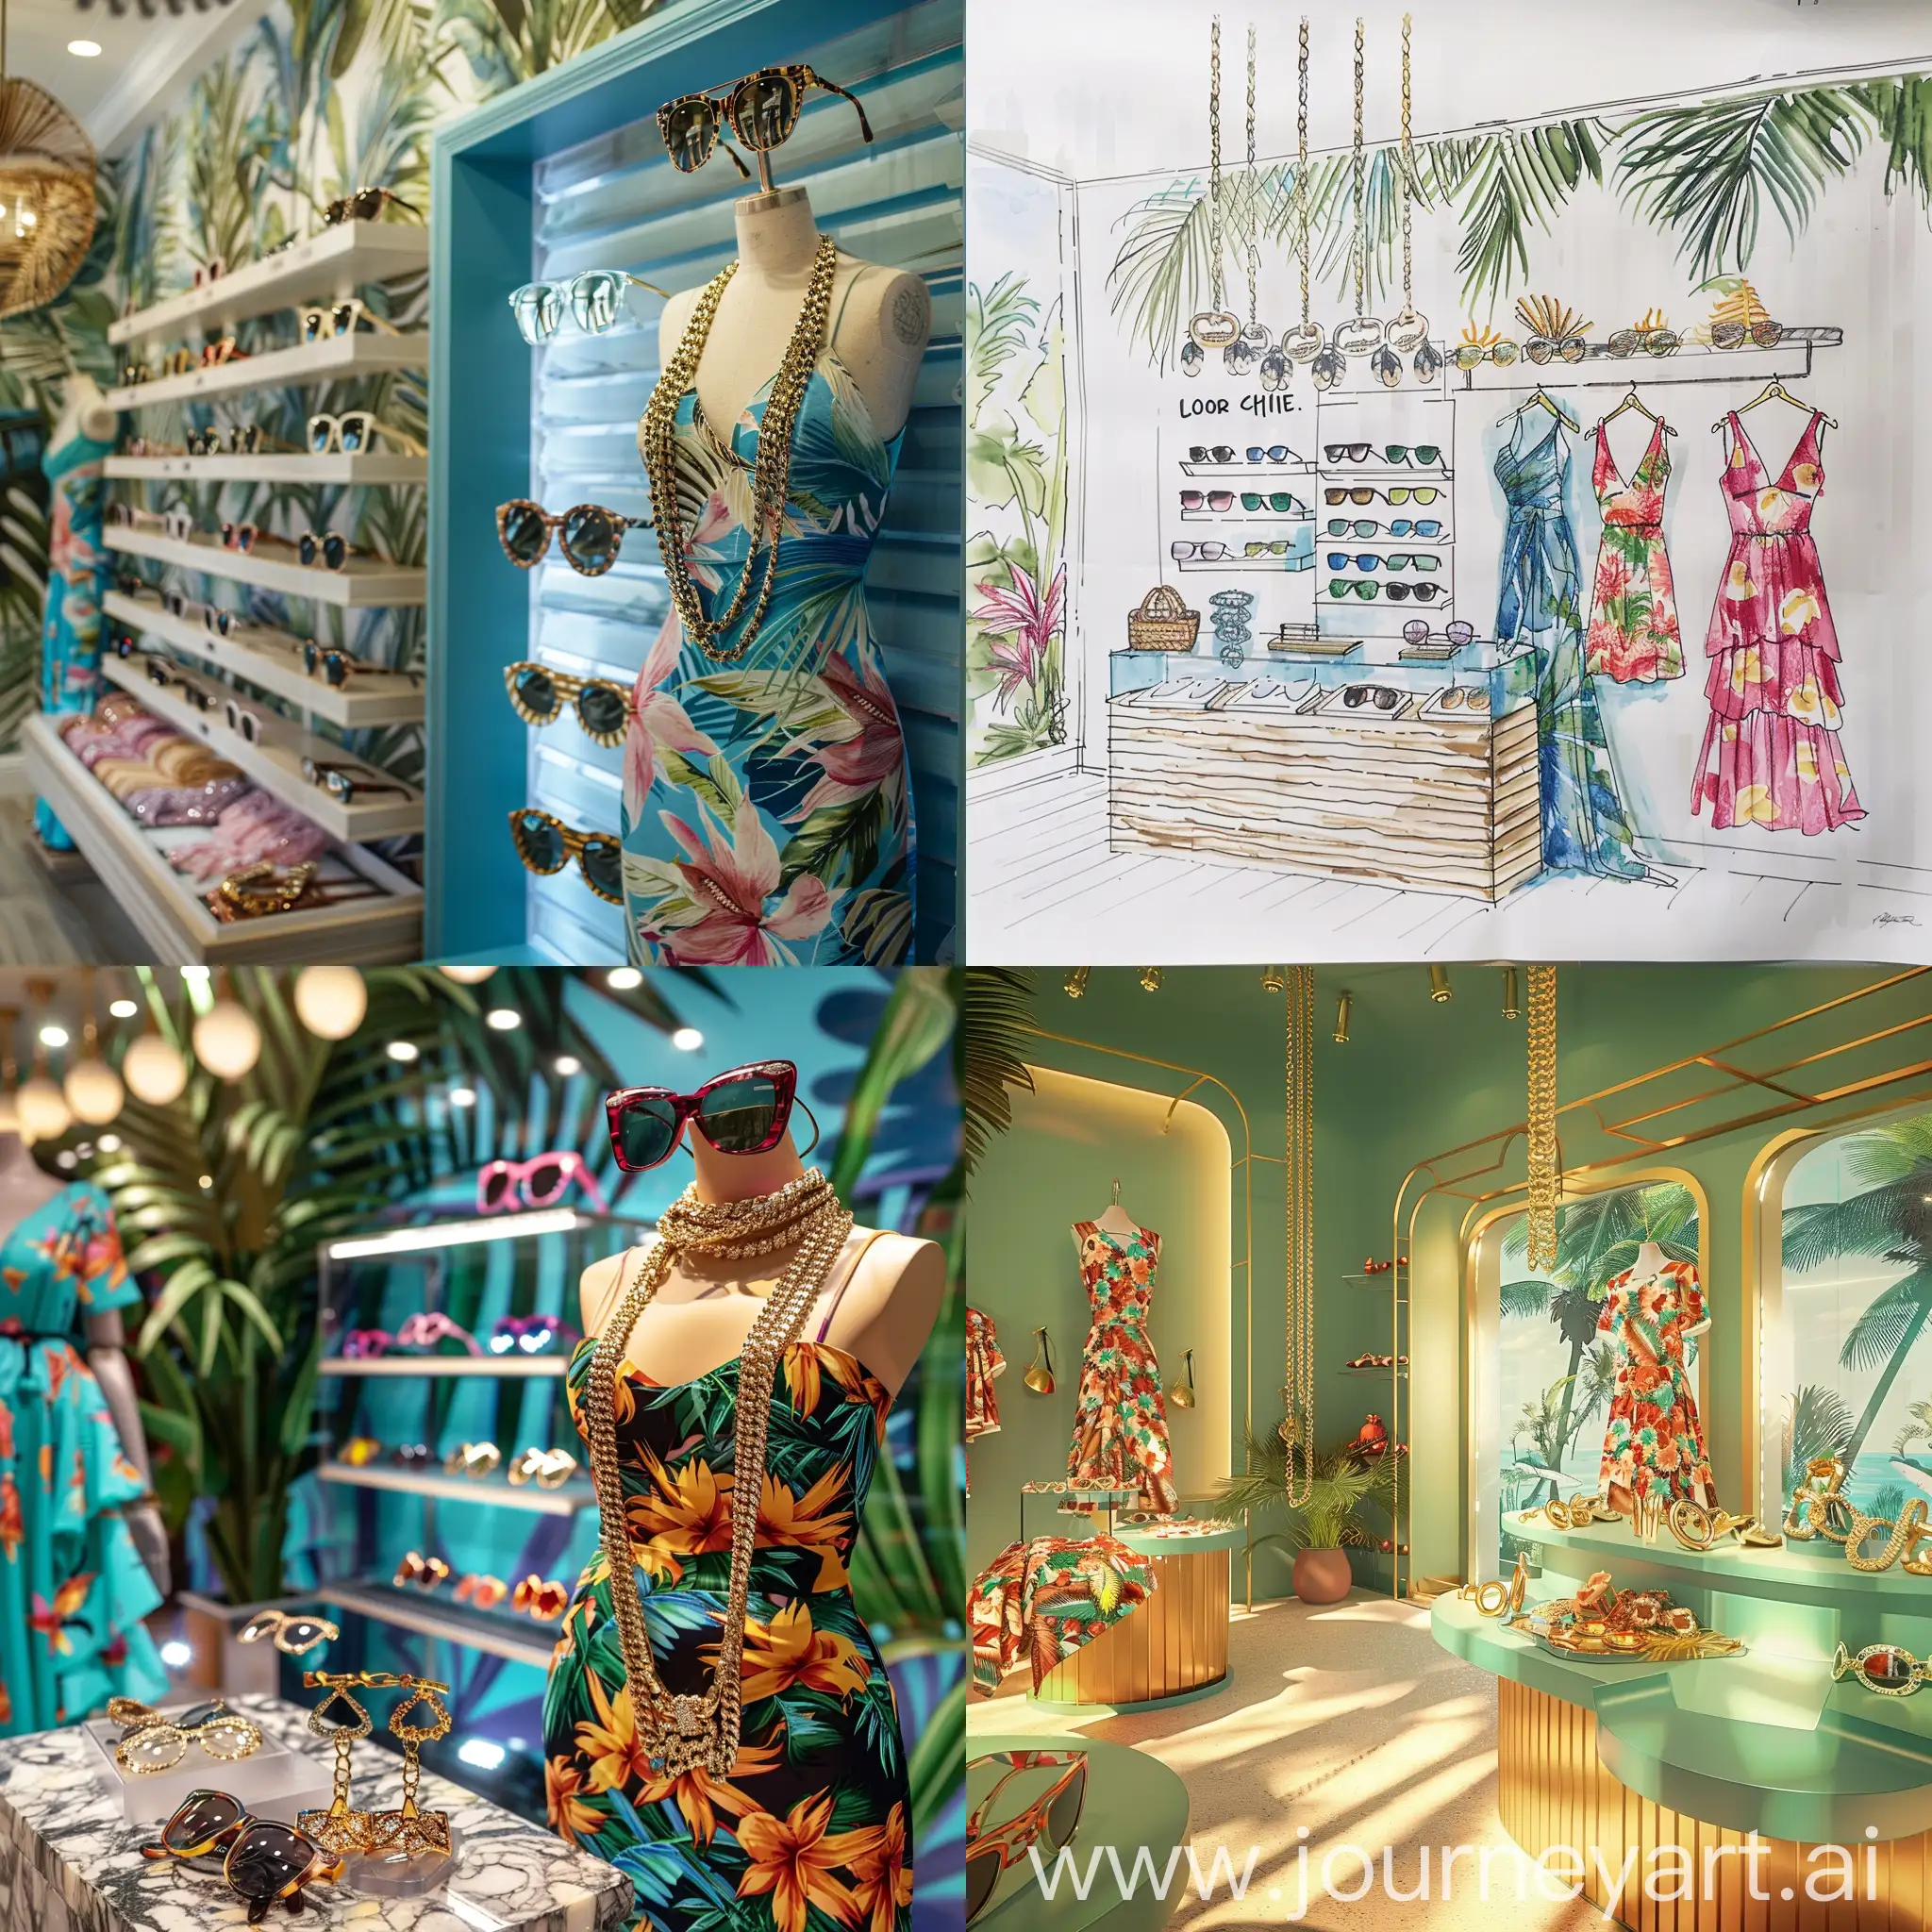 Tropic-Chic-Boutique-Tropical-Store-Selling-Beach-Accessories-and-Prestigious-Dresses